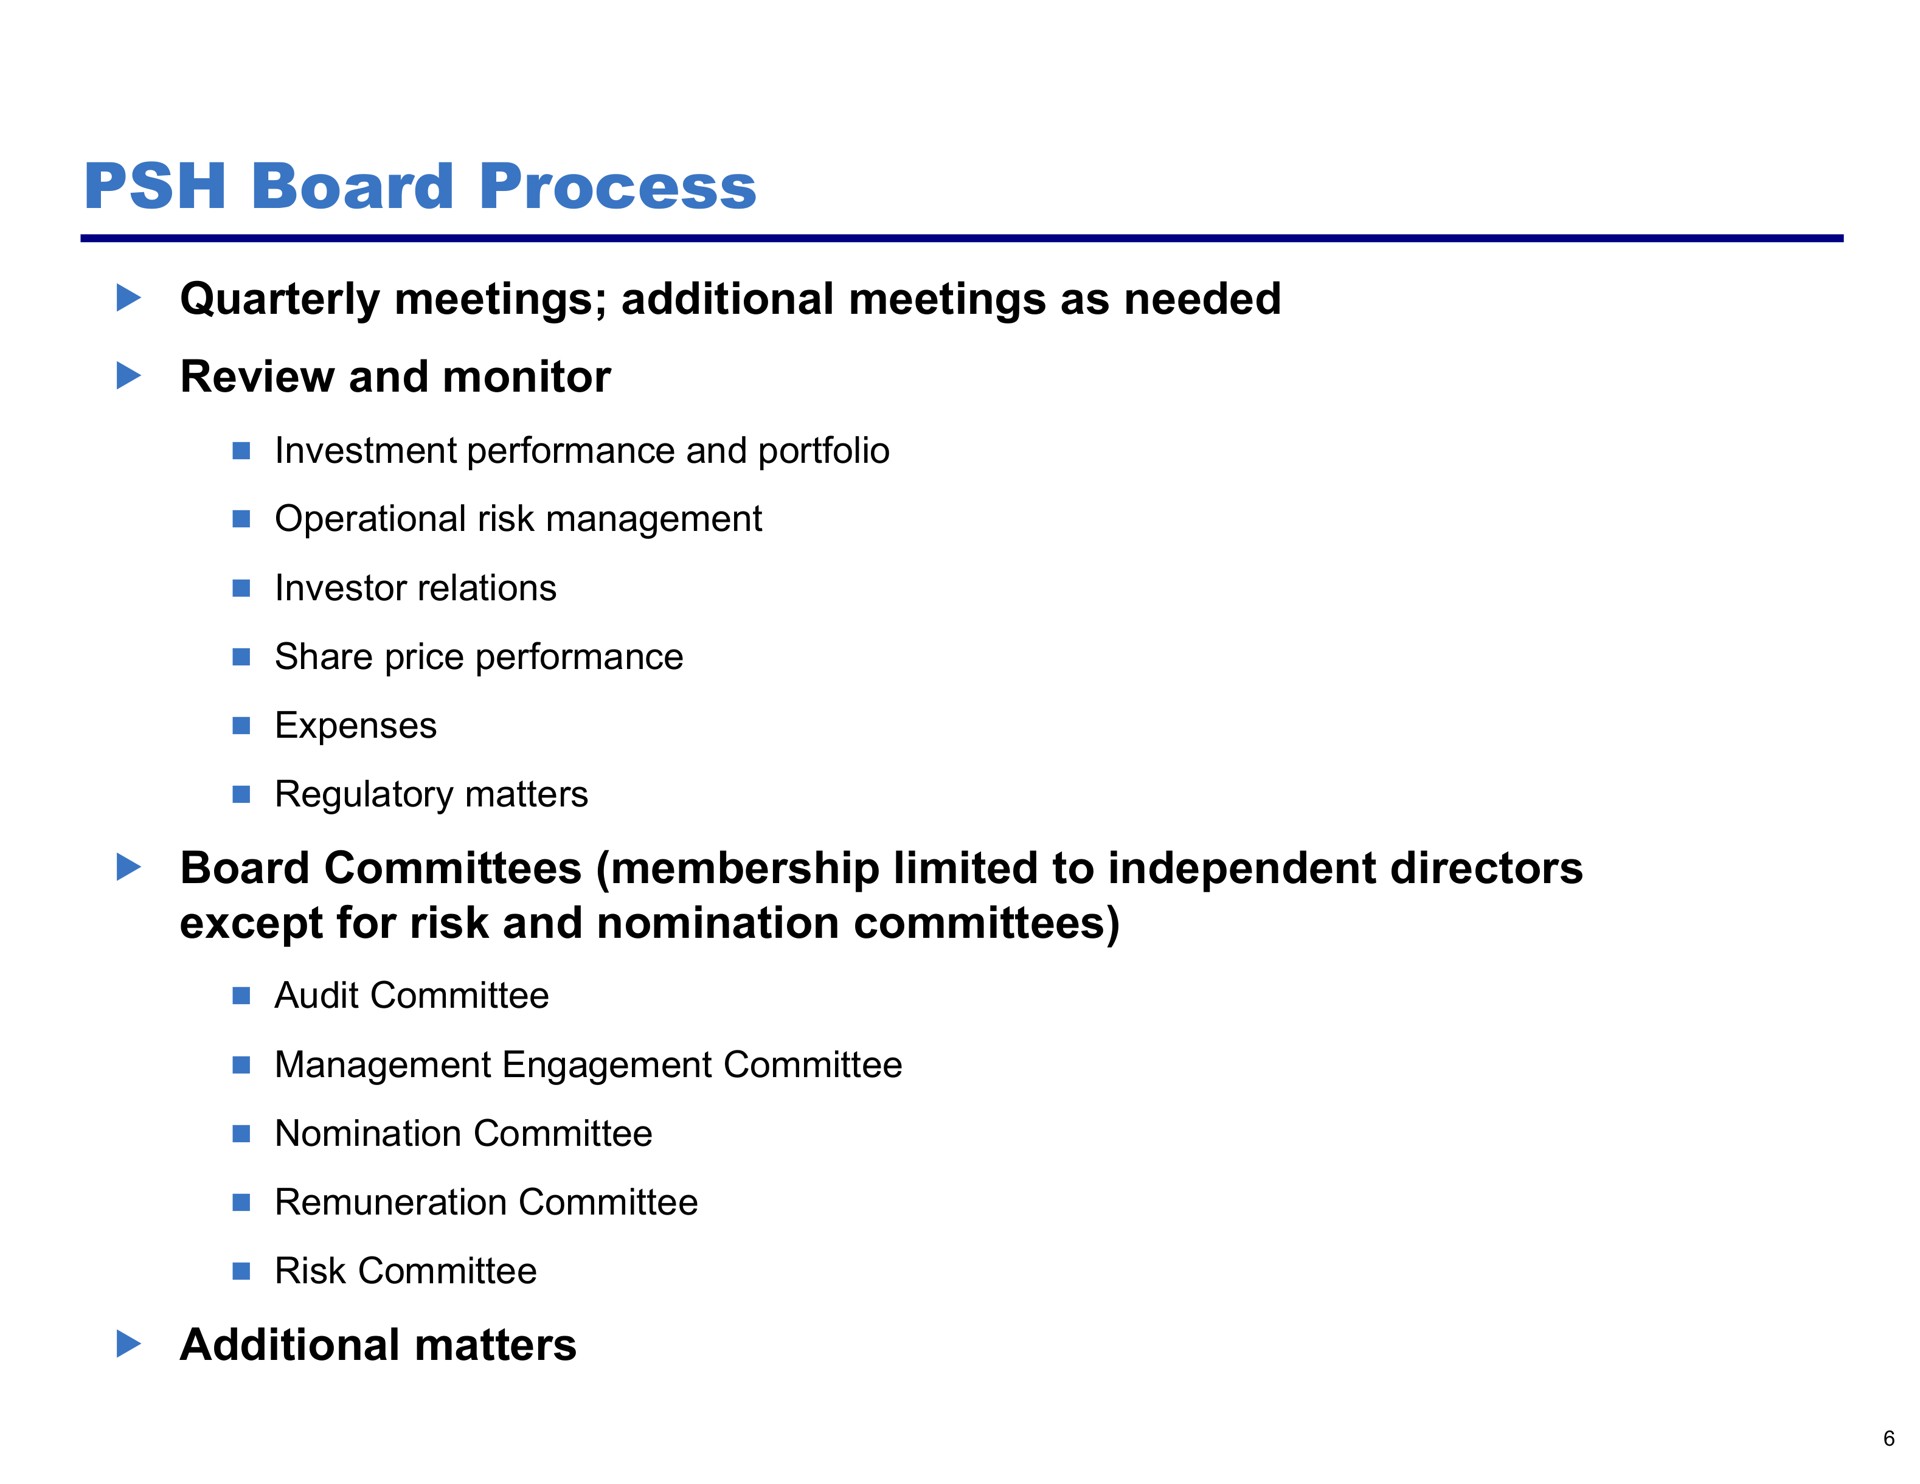 board process quarterly meetings additional meetings as needed review and monitor board committees membership limited to independent directors except for risk and nomination committees additional matters | Pershing Square